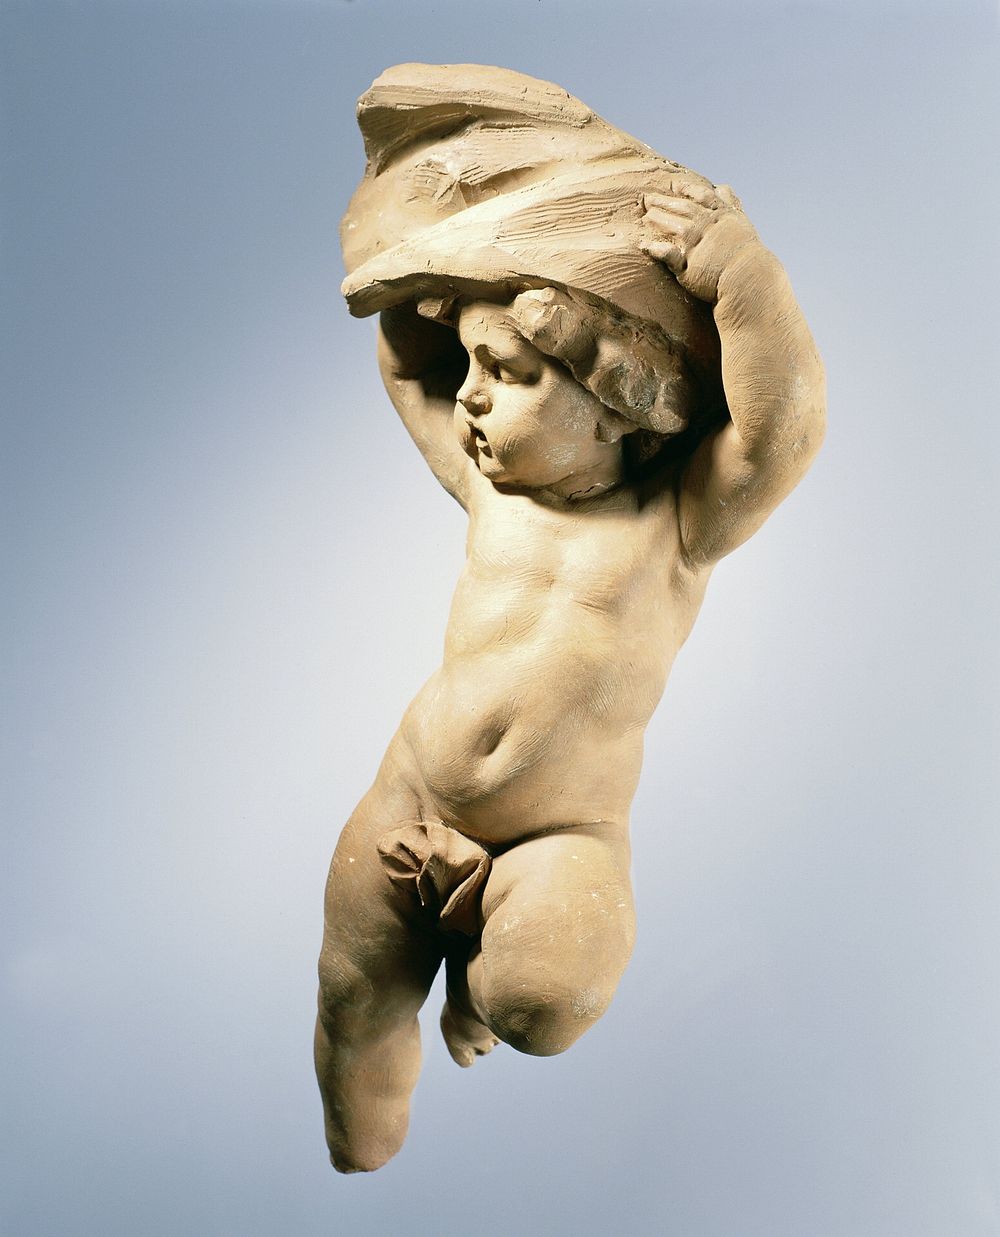 Study for a Hovering Putto (c. 1735 - c. 1750) by Laurent Delvaux and Jan Baptist Xavery